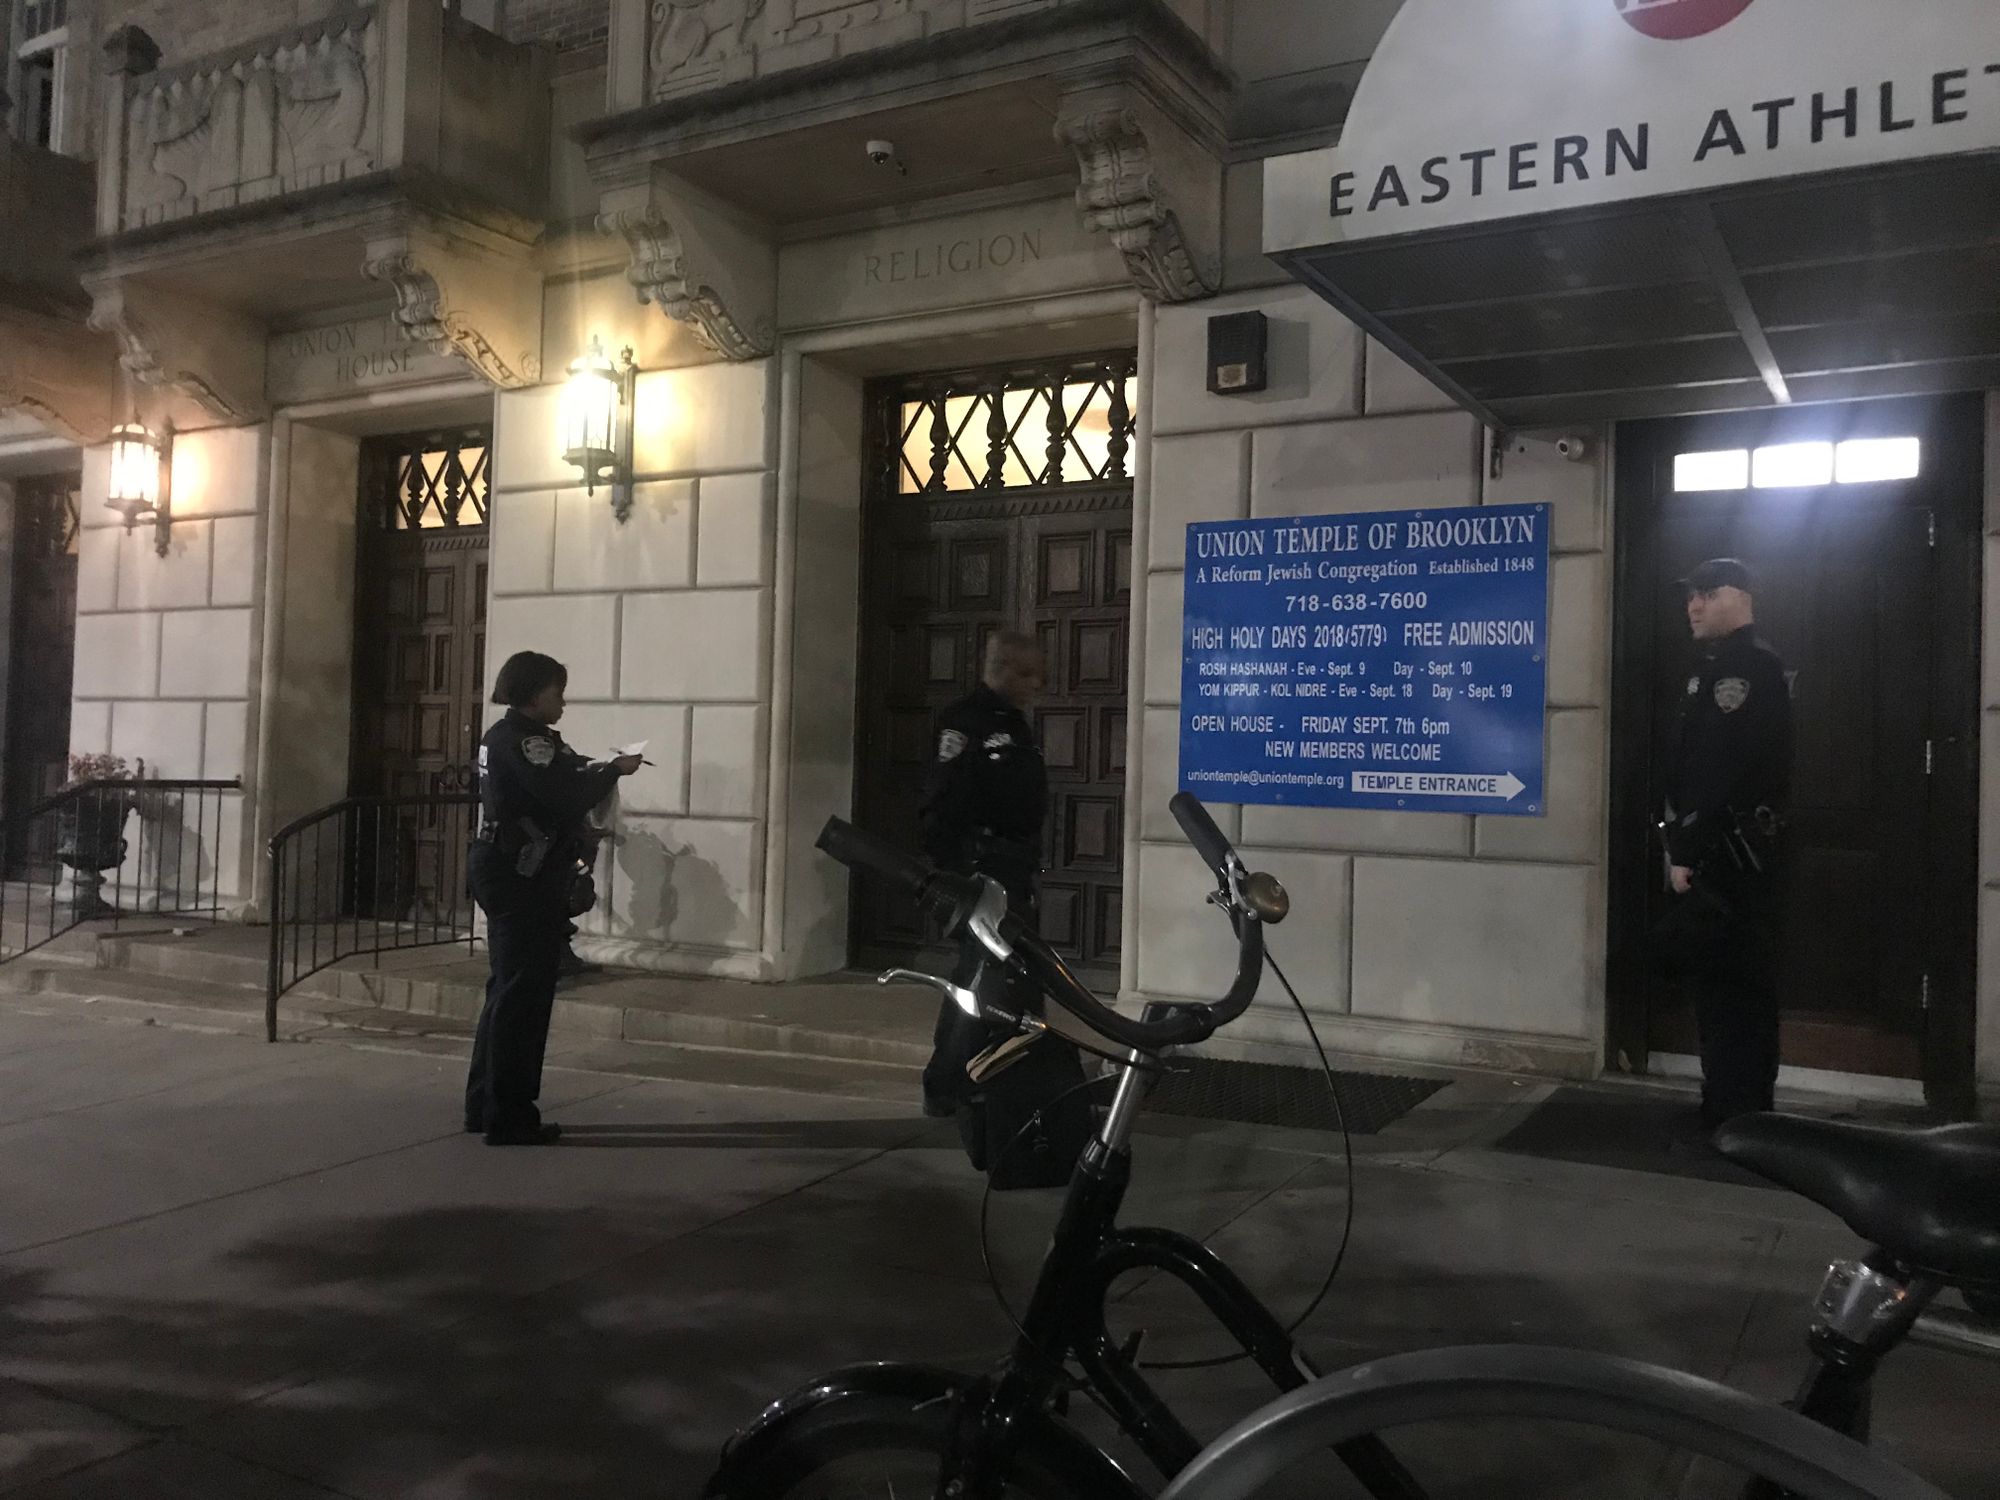 Political Event Canceled After Anti-Semitic Graffiti Found At Union Temple of Brooklyn